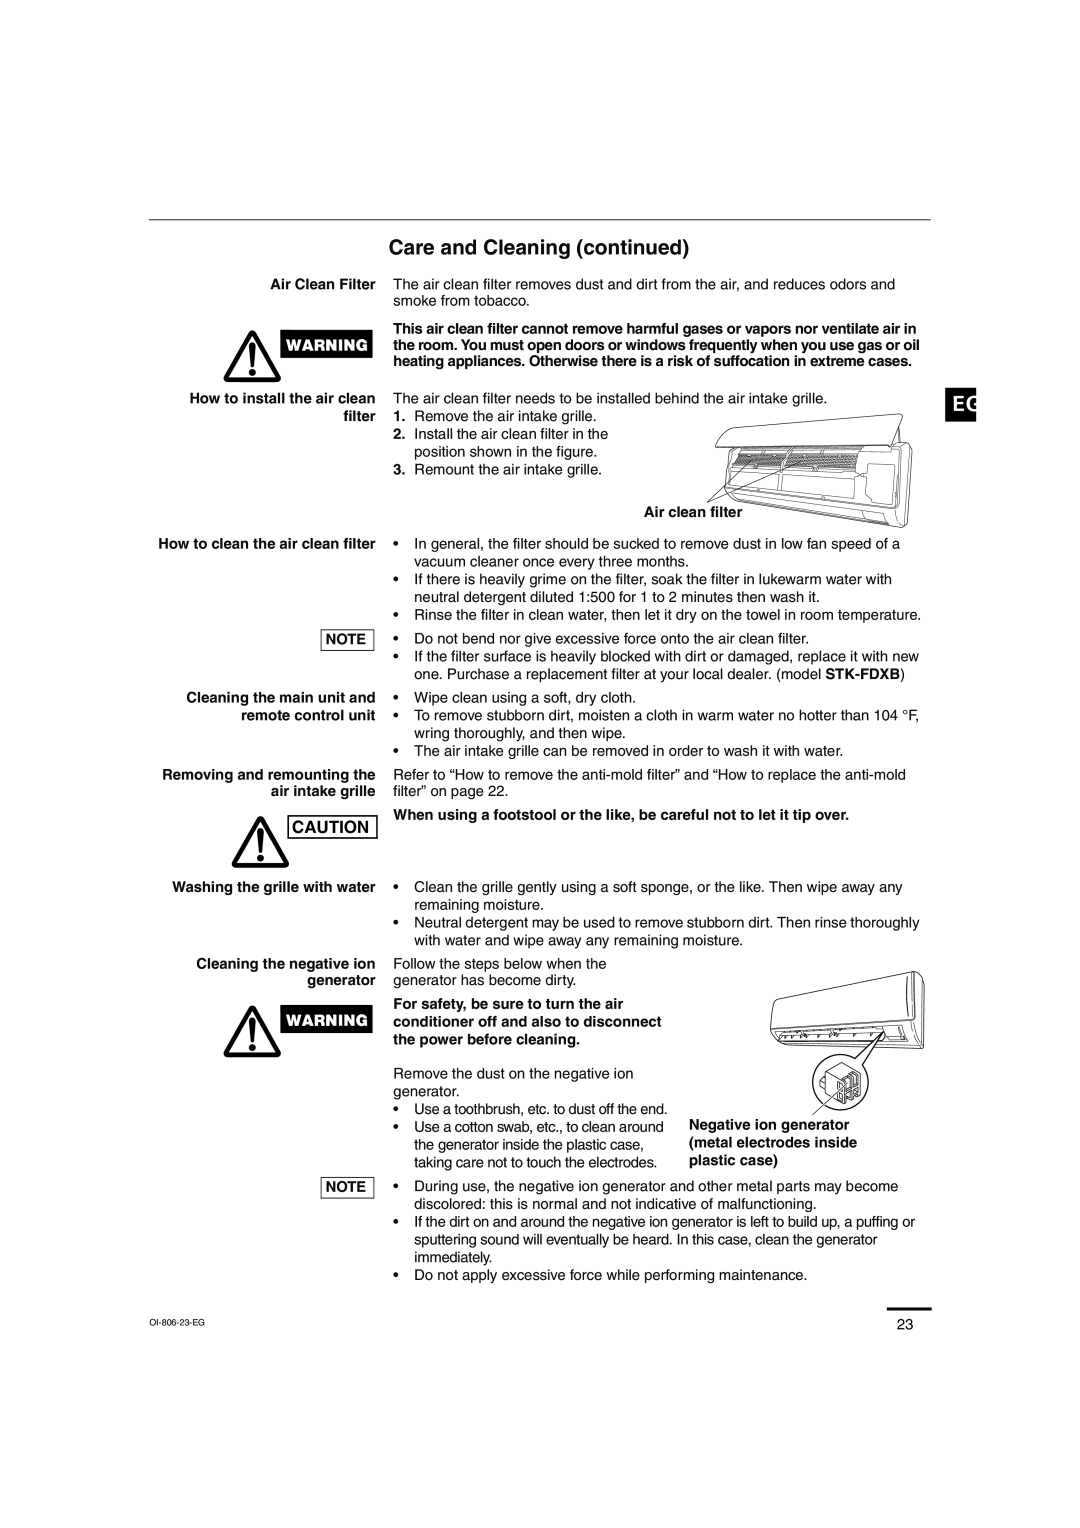 Sanyo KMS1272, KMS0972 instruction manual Care and Cleaning continued, Air Clean Filter 